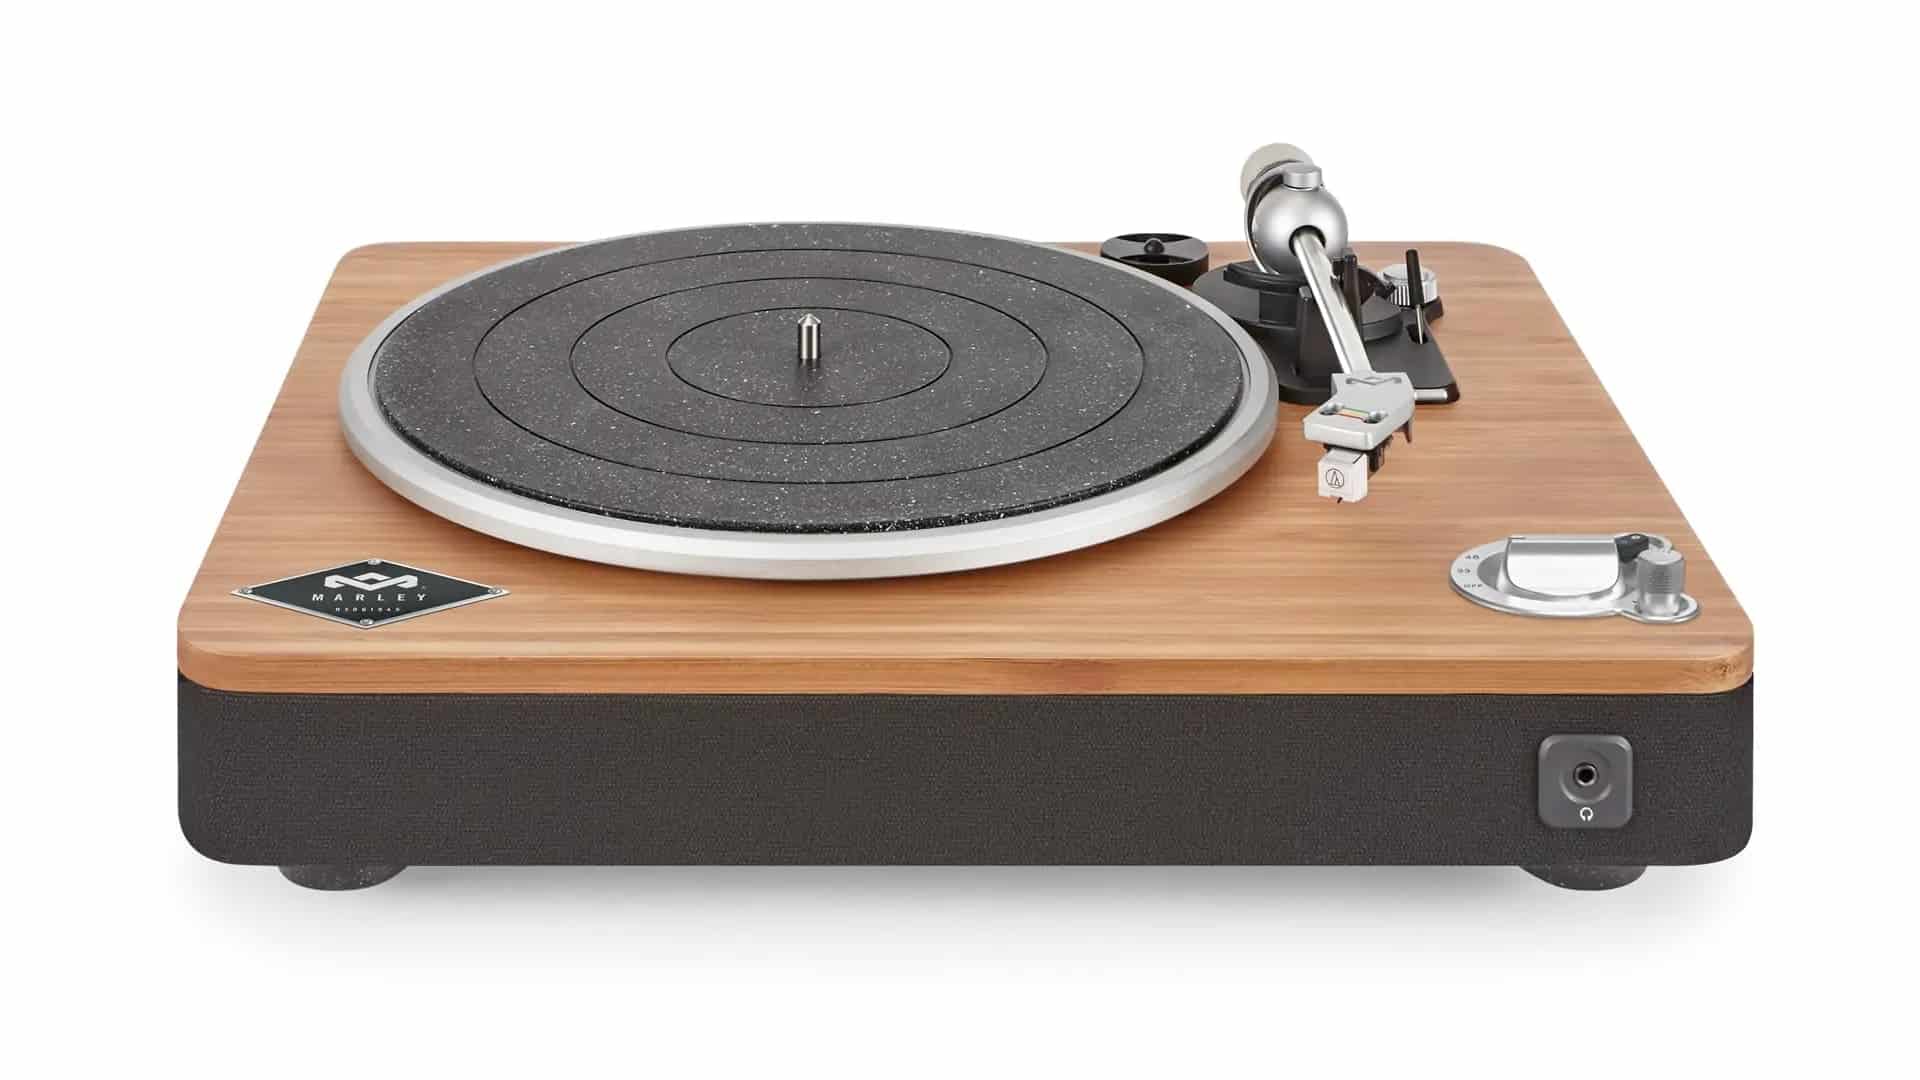 house of marley stir it up turntable